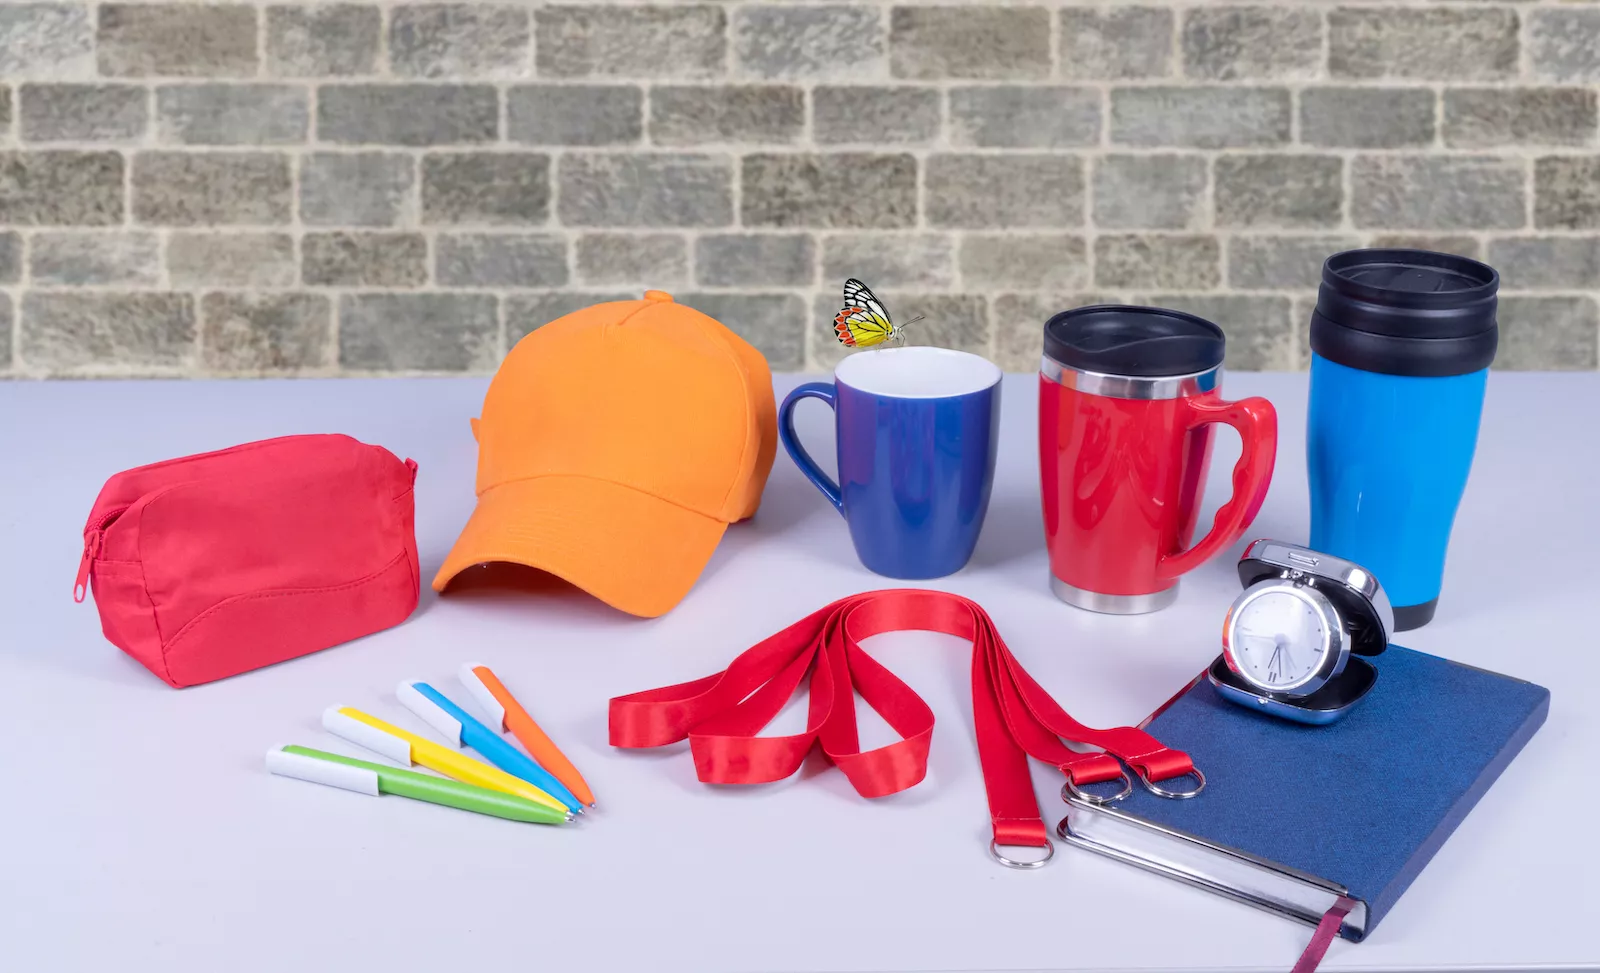 Marketing swag & promotional products + ideas, tips, & inspiration!